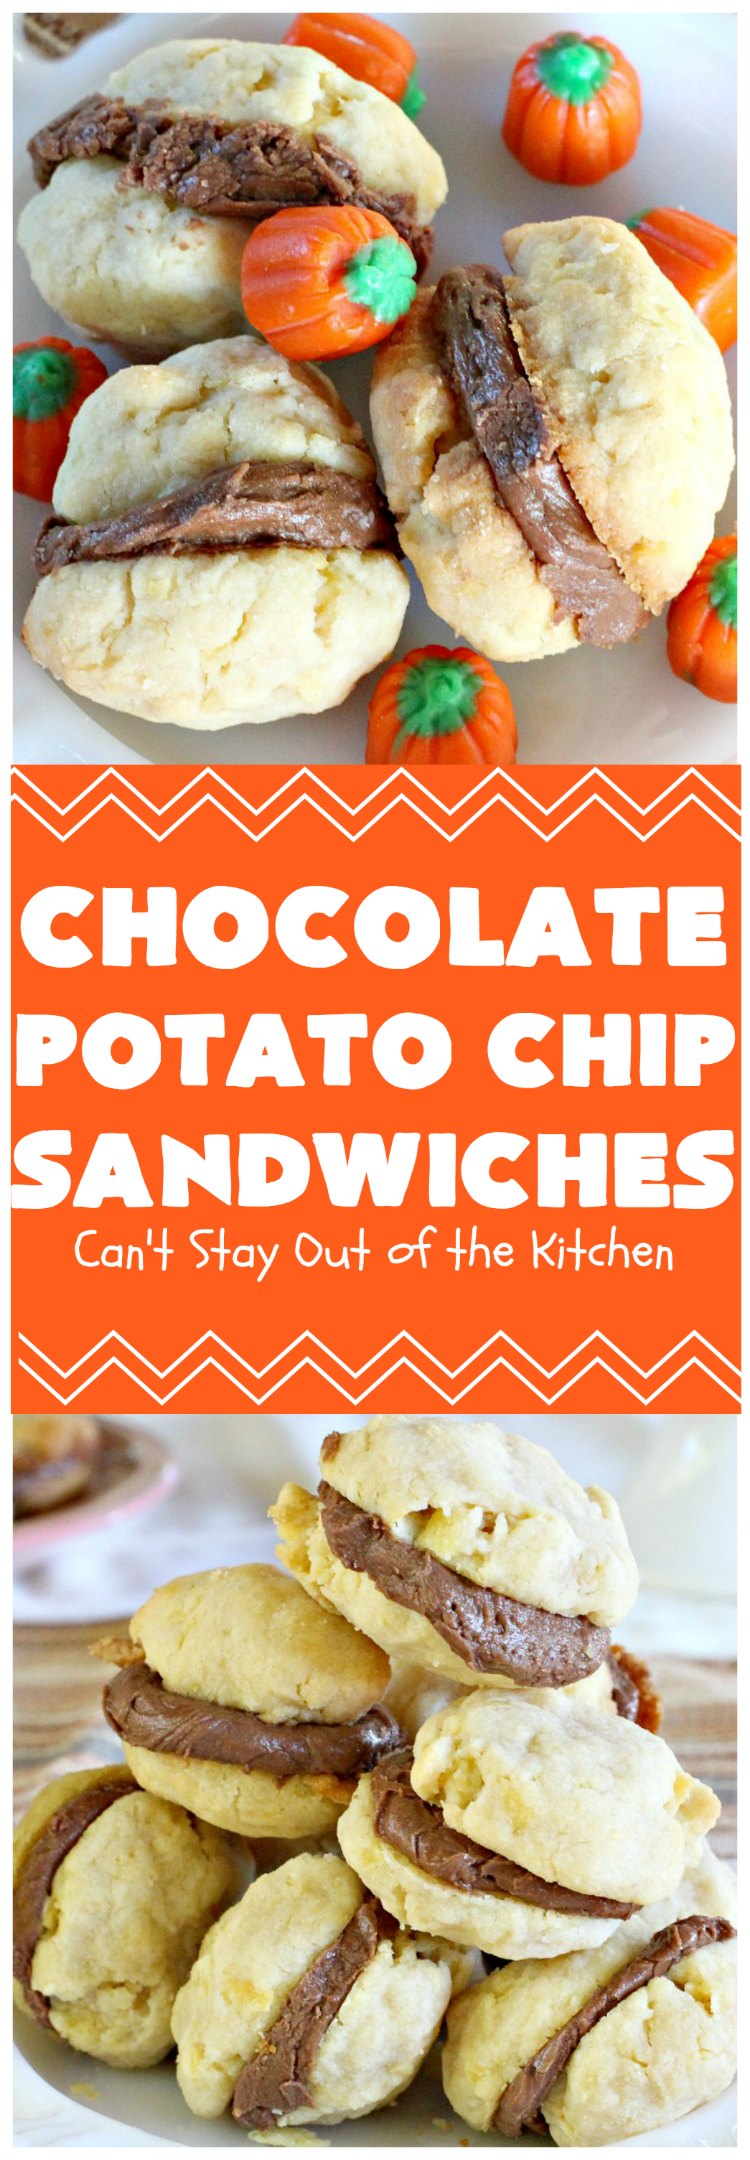 Chocolate Potato Chip Sandwiches | Can't Stay Out of the Kitchen